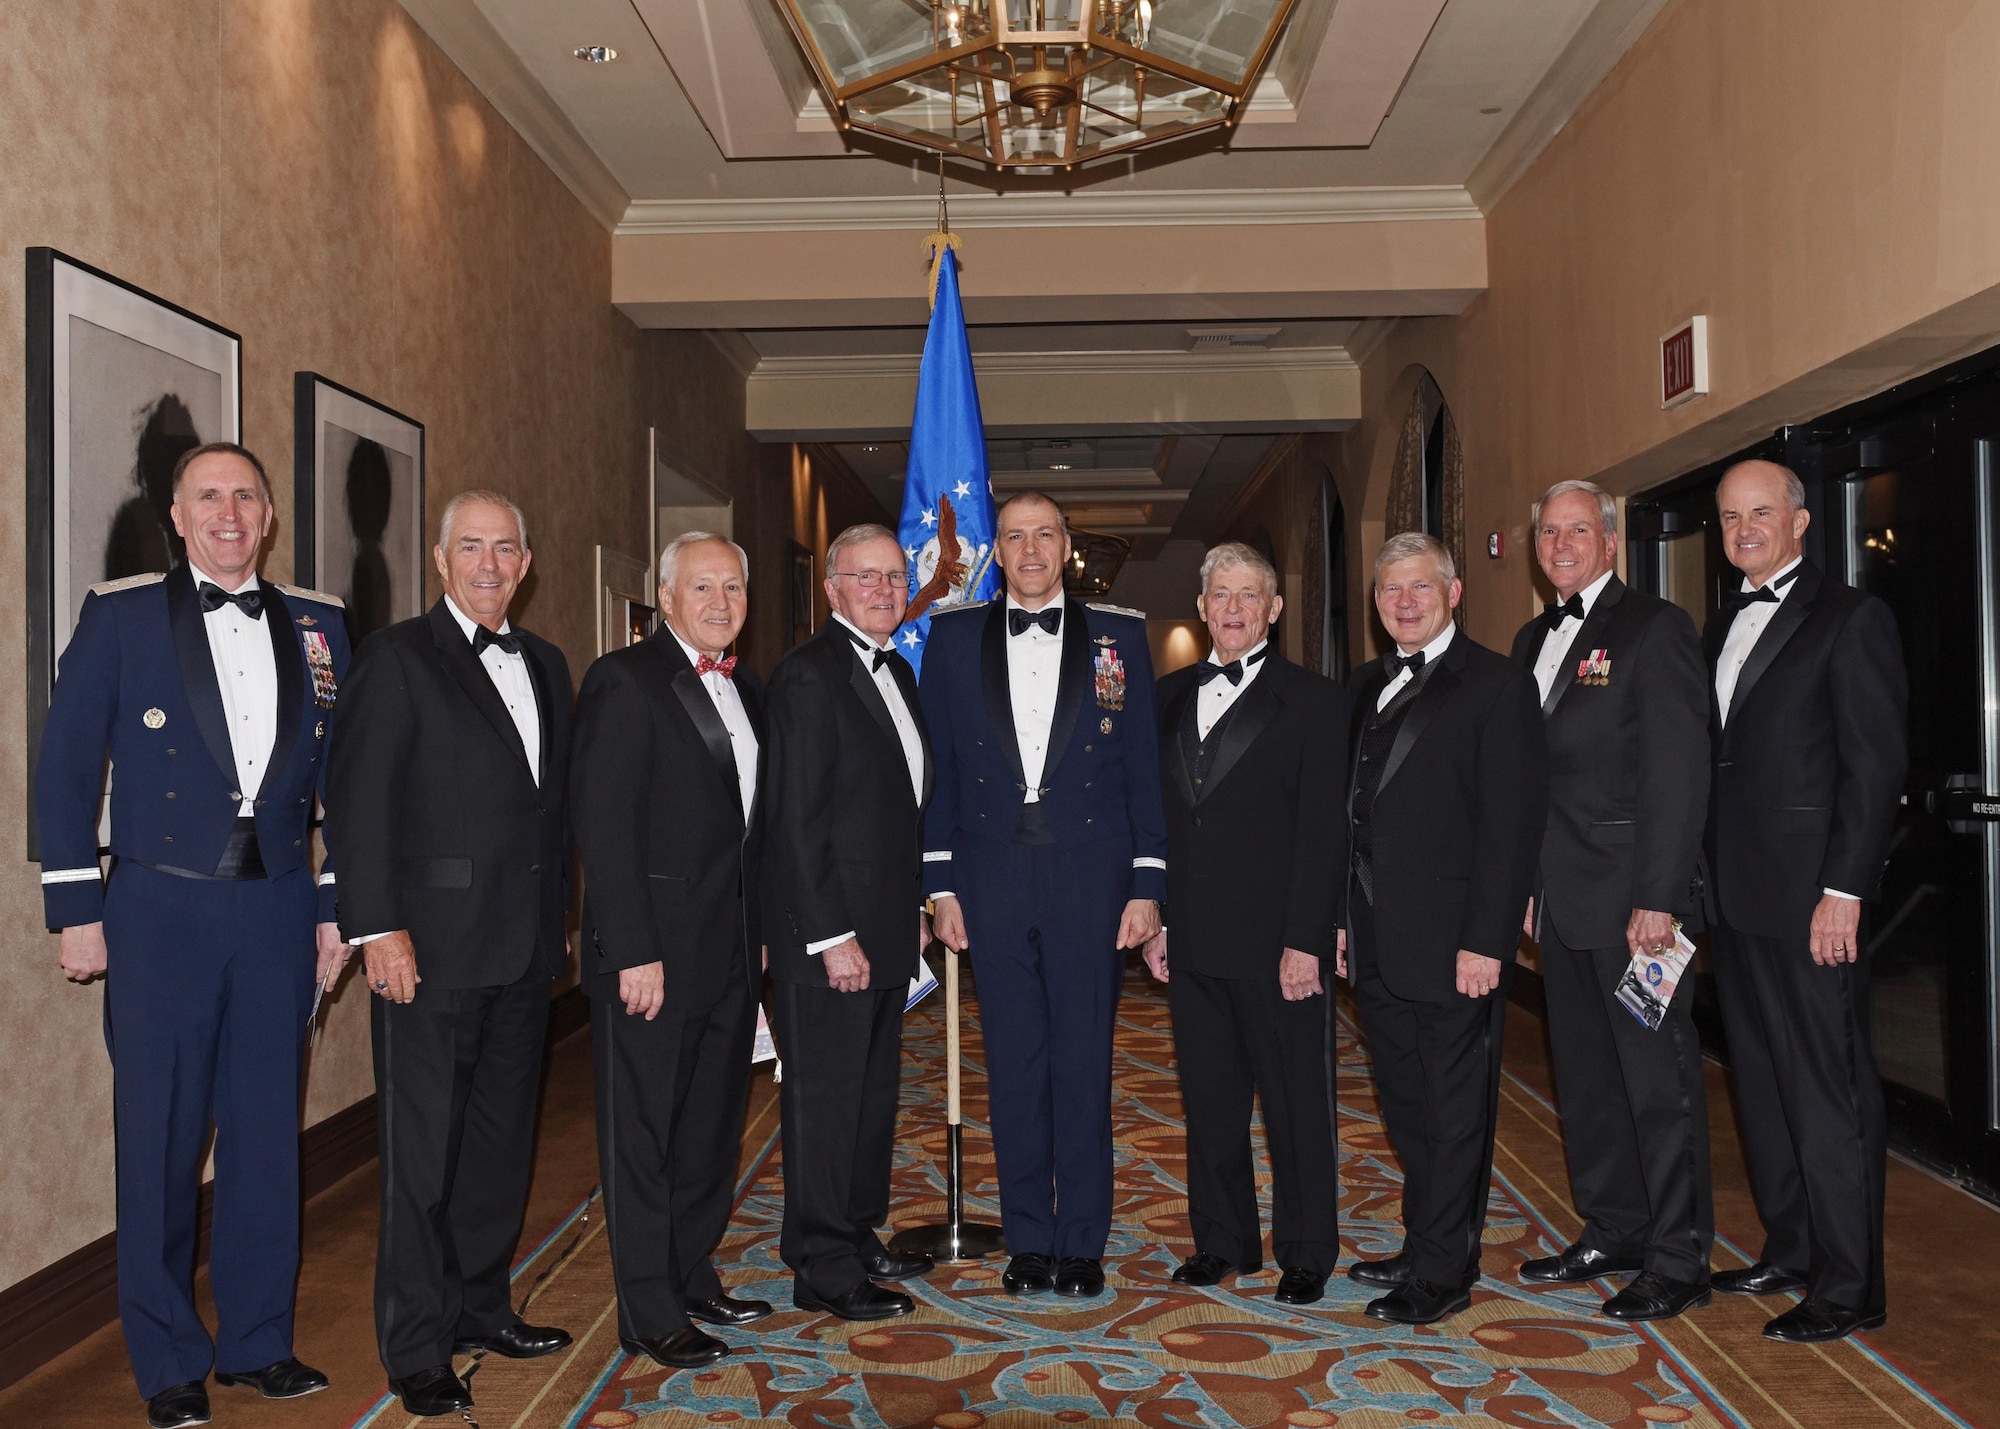 U.S. Air Force Maj. Gen. Thomas Bussiere, 8th Air Force commander, stands with former 8th AF commanders at a gala hosted by a local support organization at Sam's Town
Hotel and Casino in Shreveport, La., Feb. 3, 2017. Former and present bomber Airmen from across the country celebrated the anniversary by partaking in various events to honor the past, present and future Airmen of the "Mighty Eighth." (U.S. Air Force photo by Senior Airman Erin Trower)
